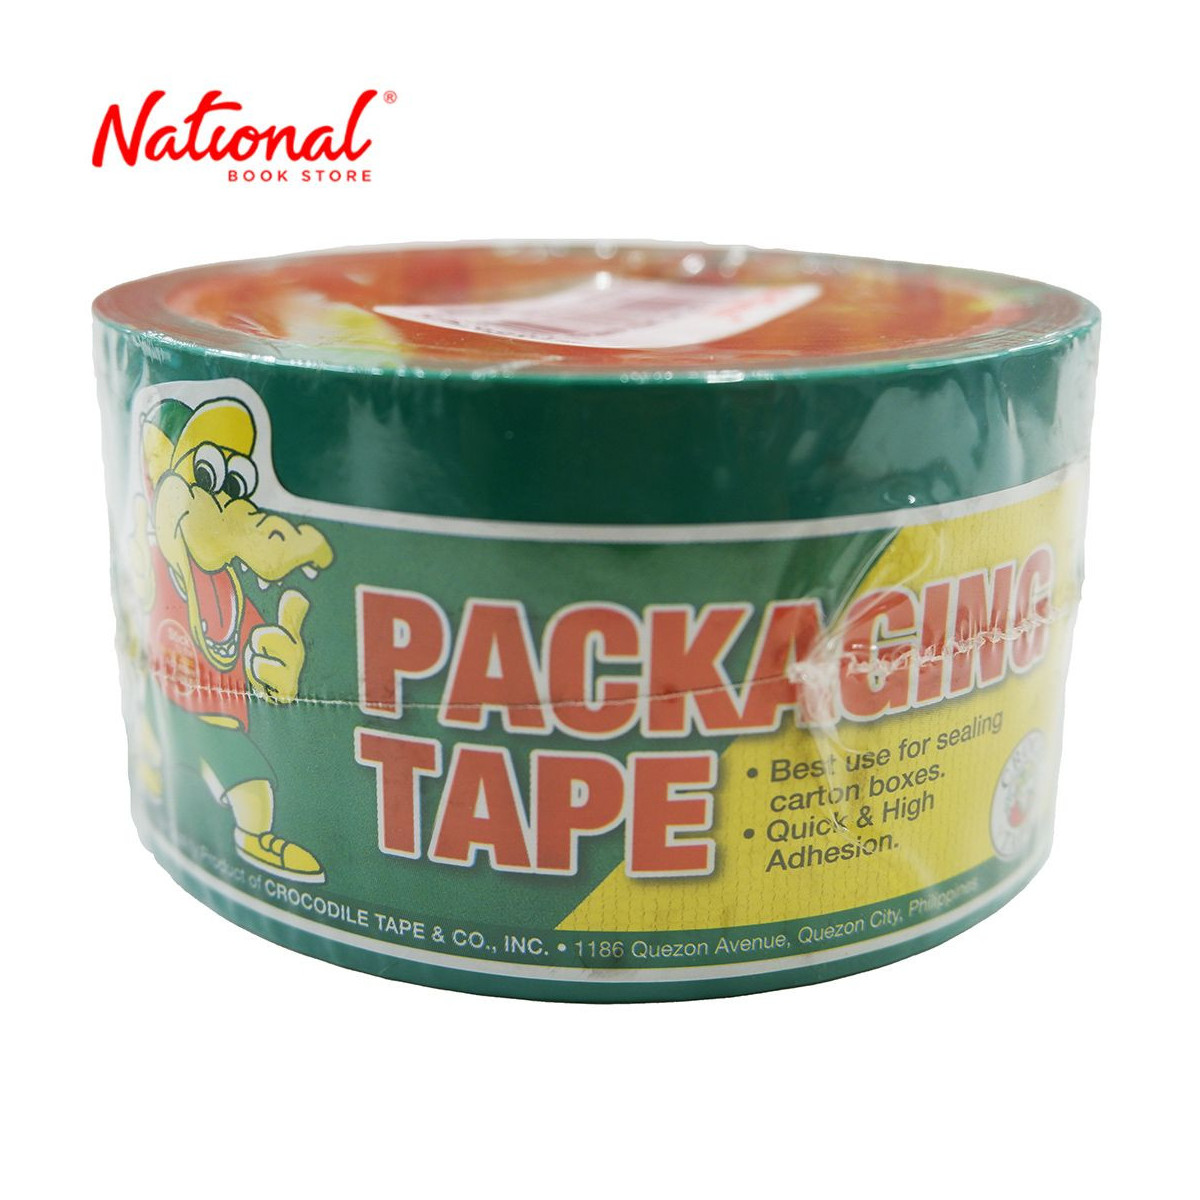 CROCO PACKAGING TAPE 48MMX40M, GREEN